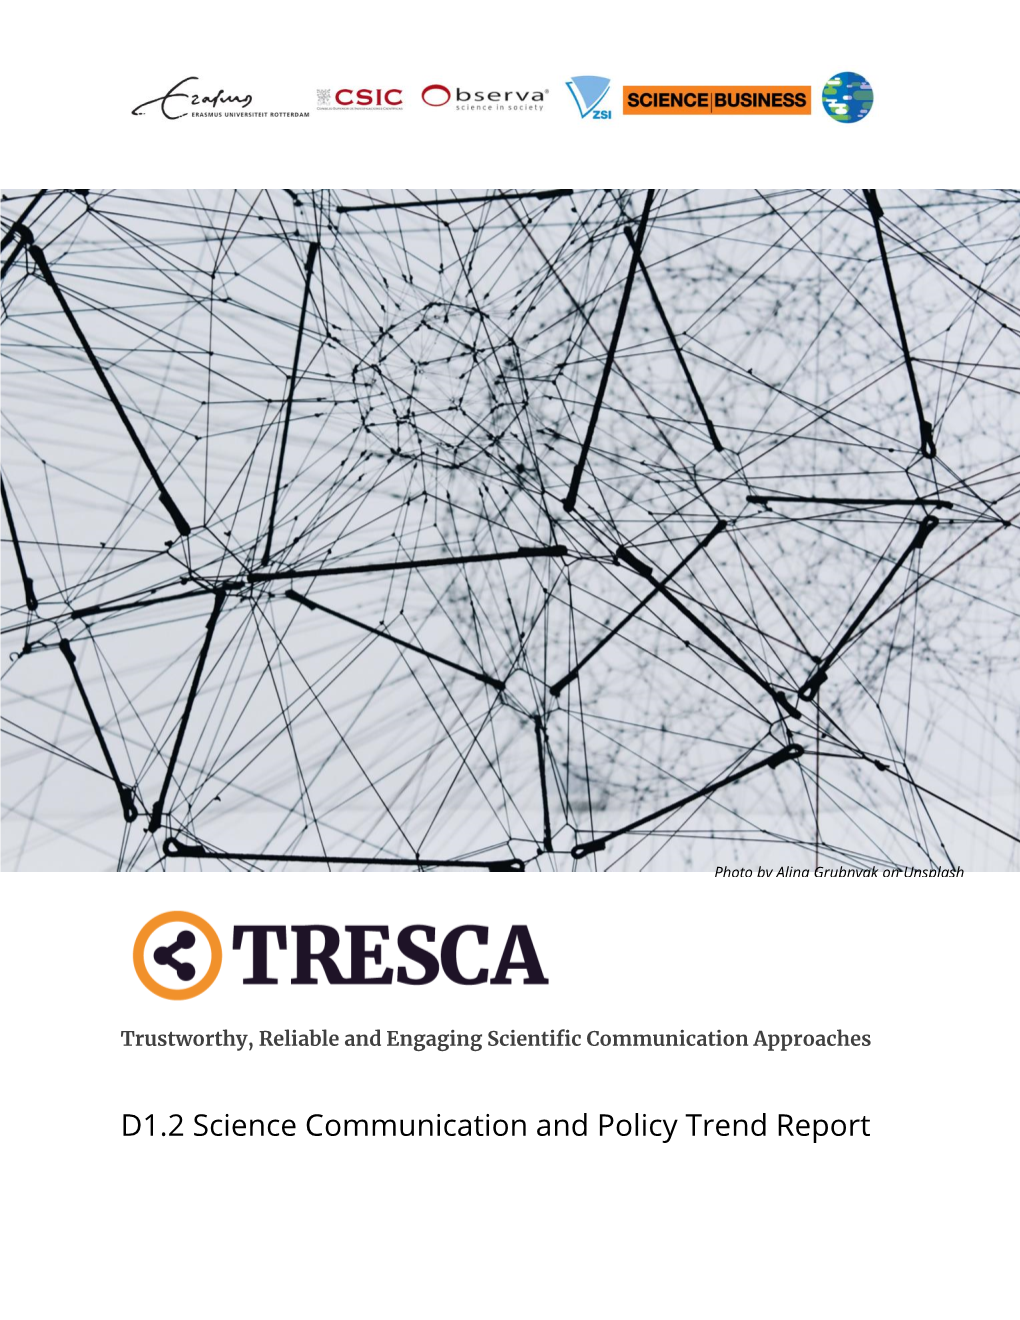 D1.2 Science Communication and Policy Trend Report